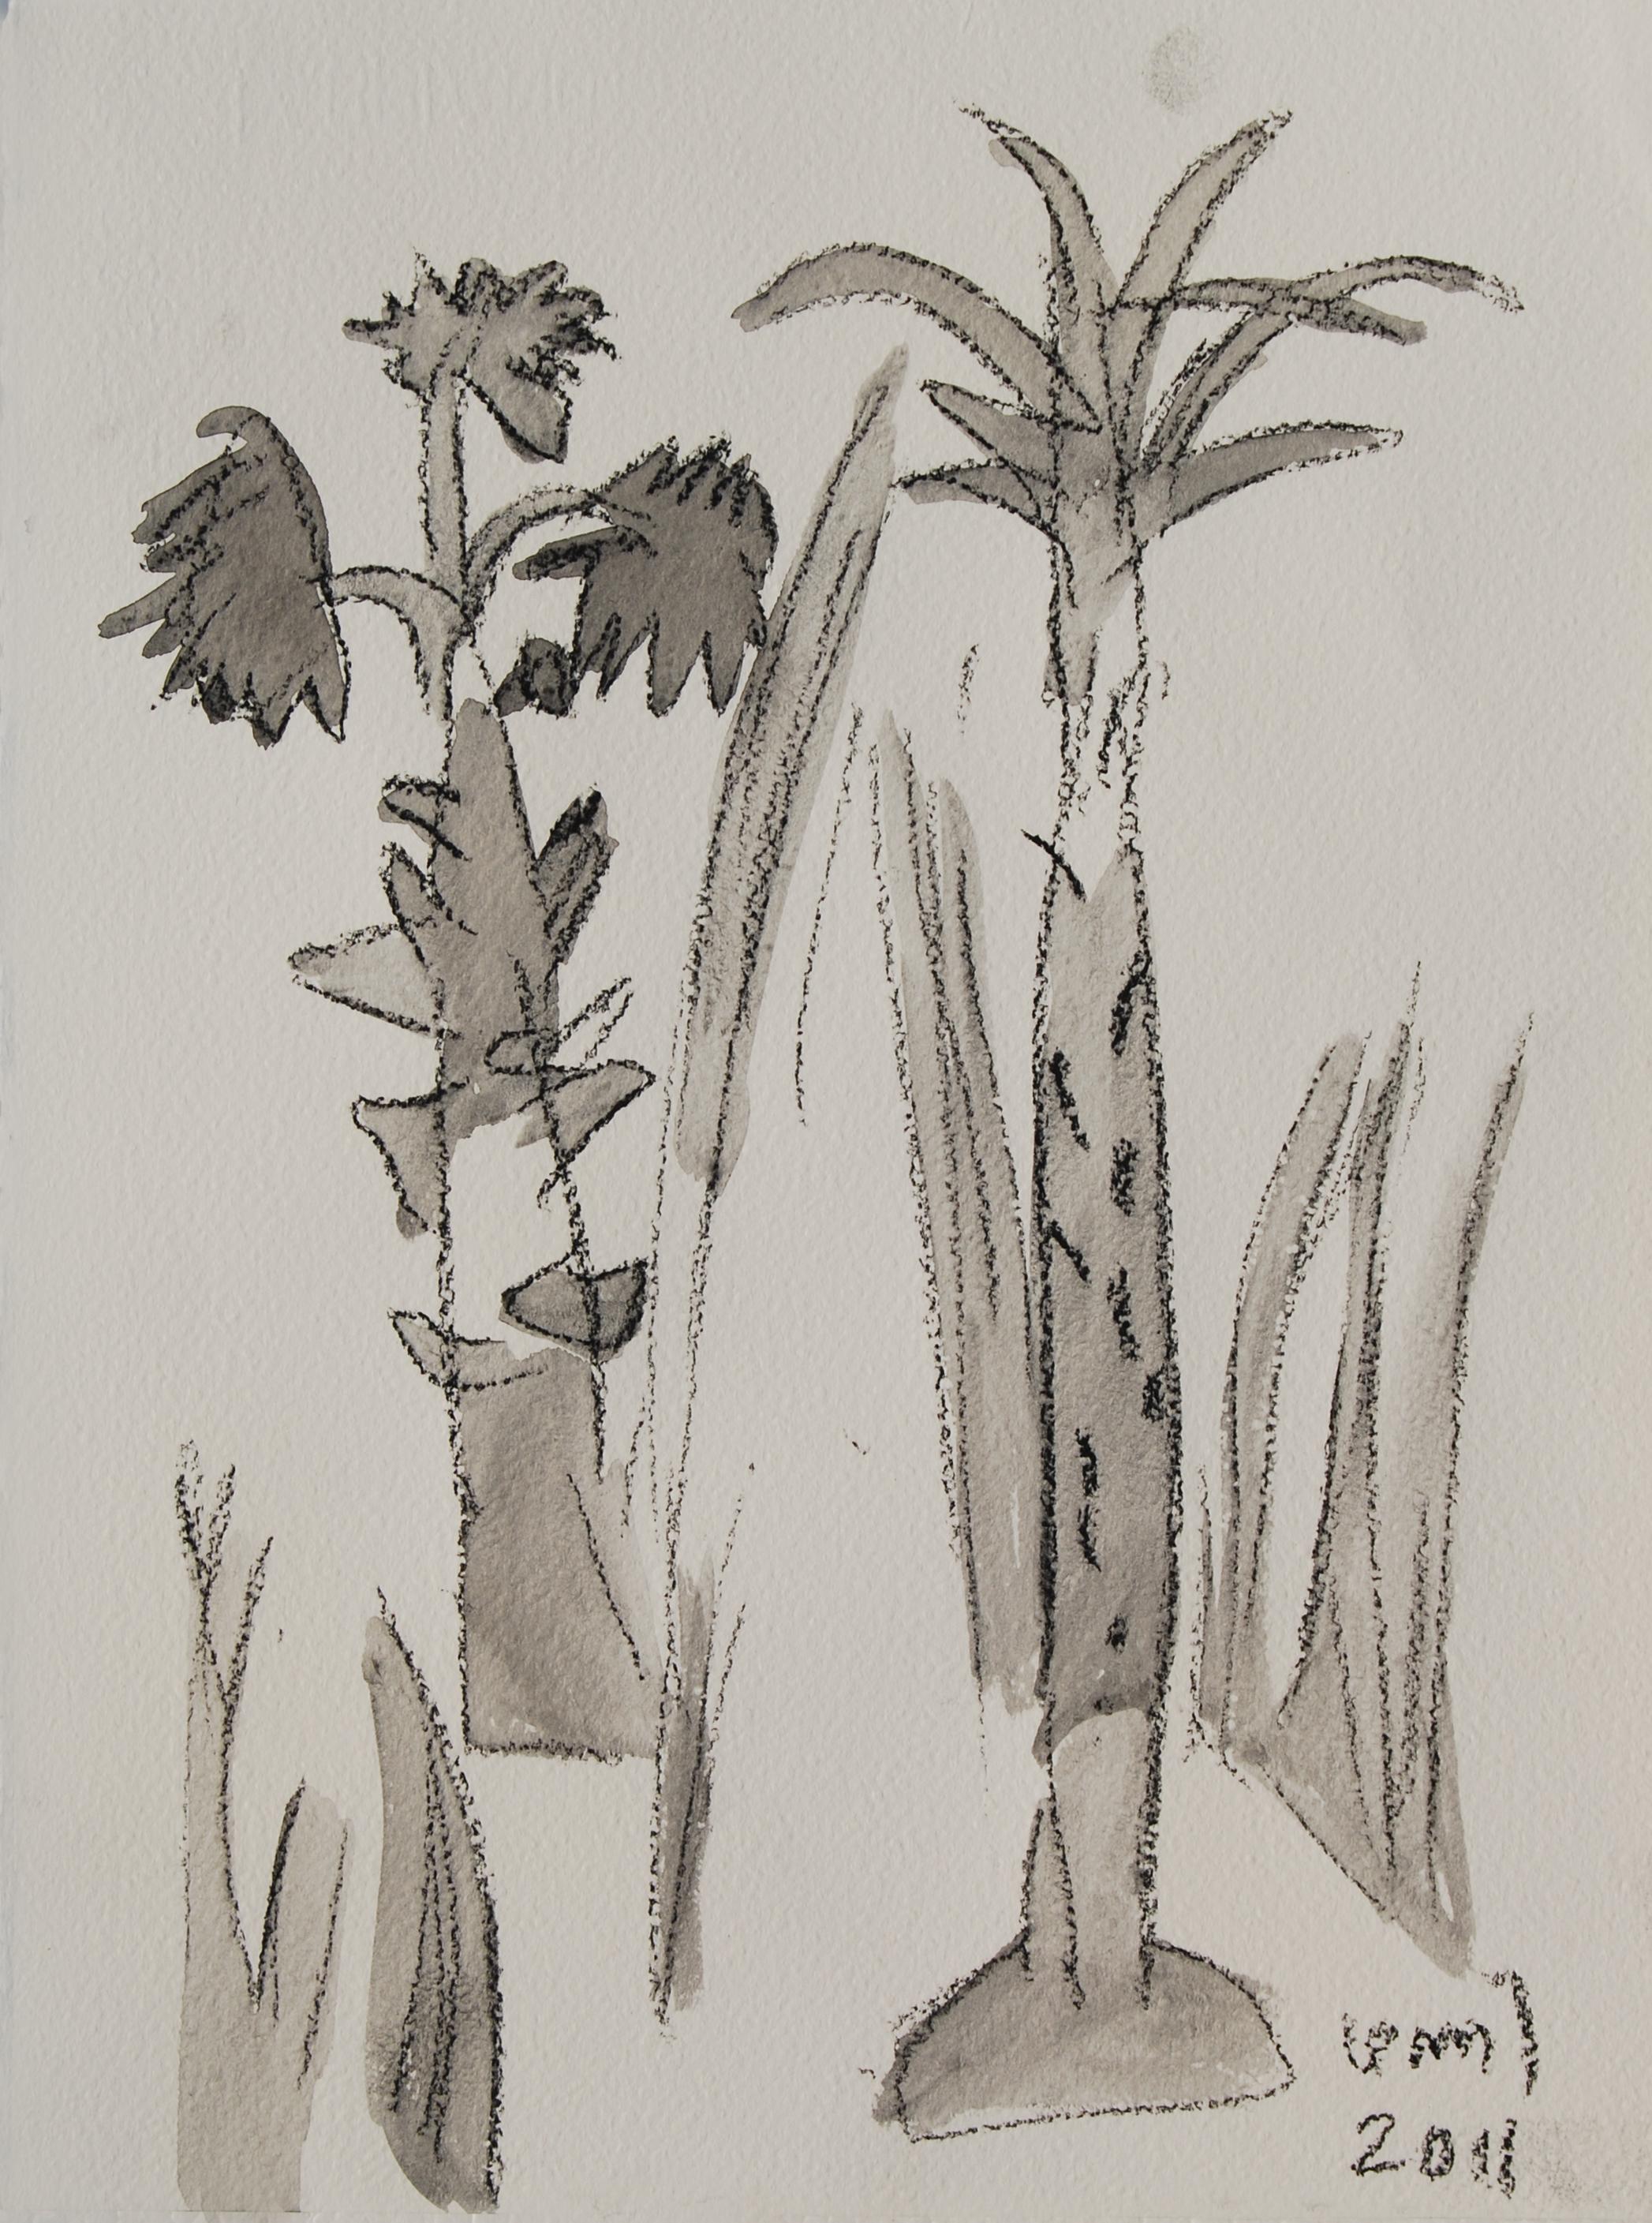 K.G. Subramanyan Figurative Art - Palm Grooves of South India, Charcoal & Wash on Paper, (set of two) "In Stock"